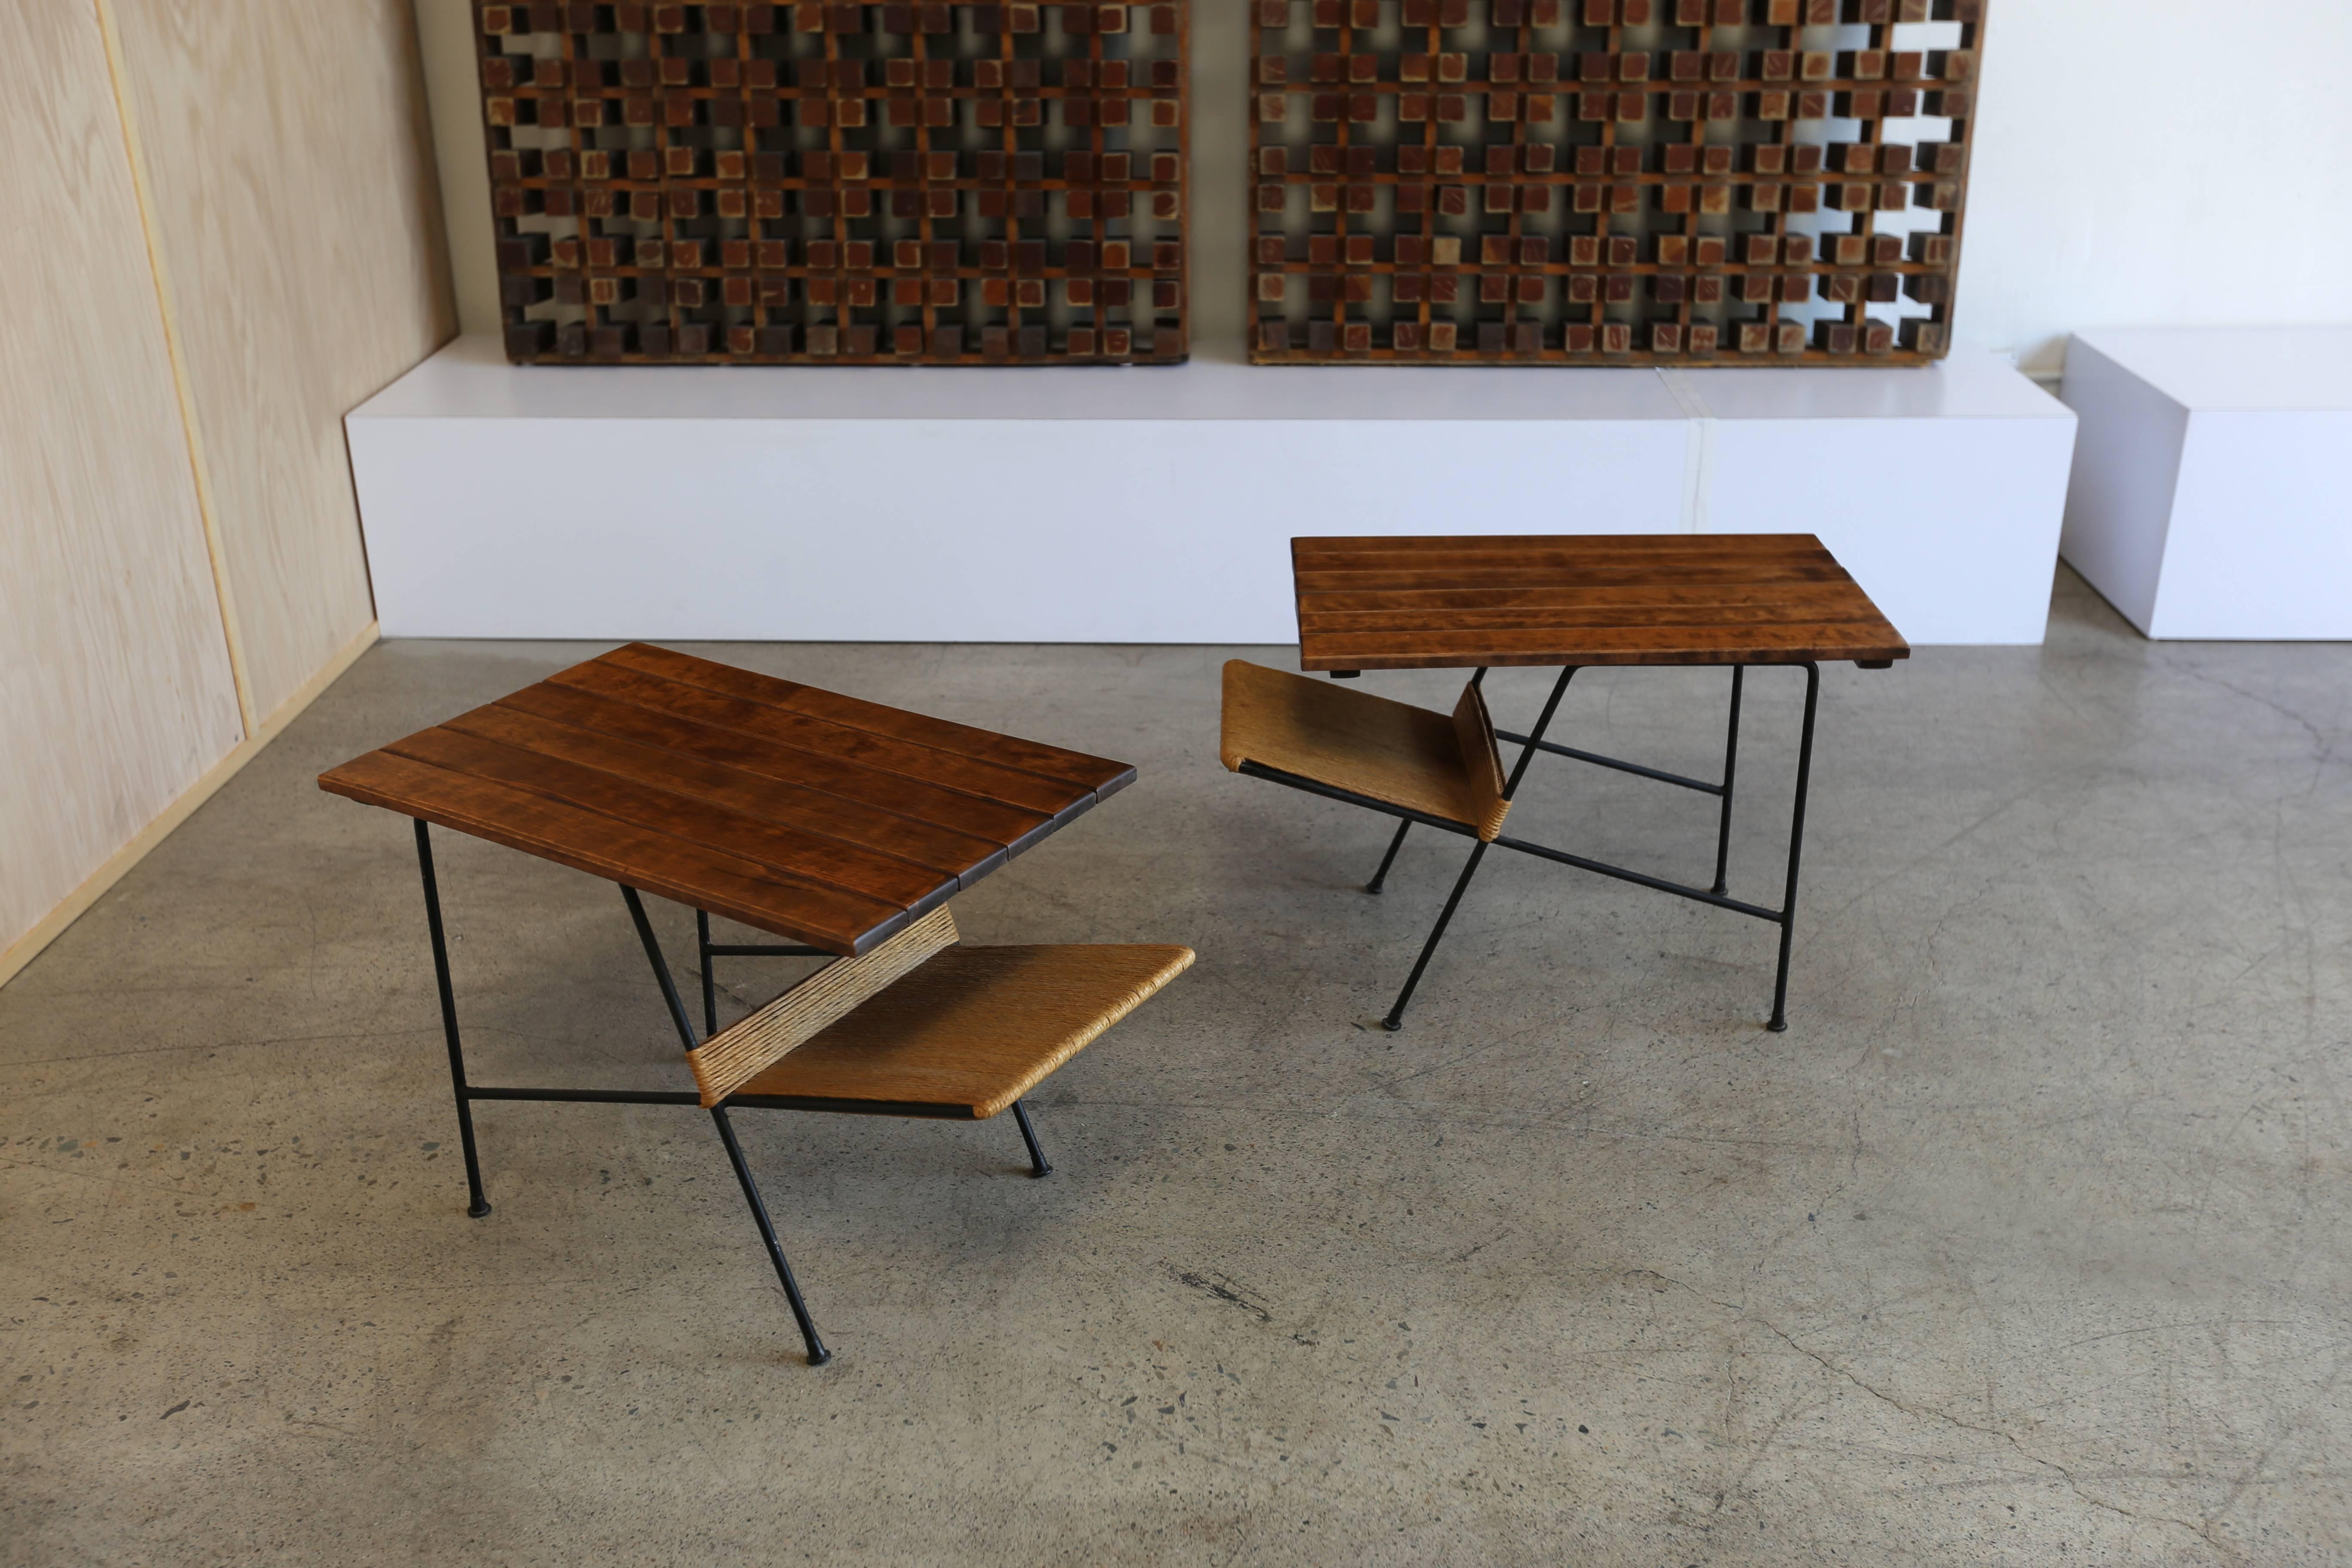 Pair of side tables by Arthur Umanoff. Papercord and iron with a slatted wood top.